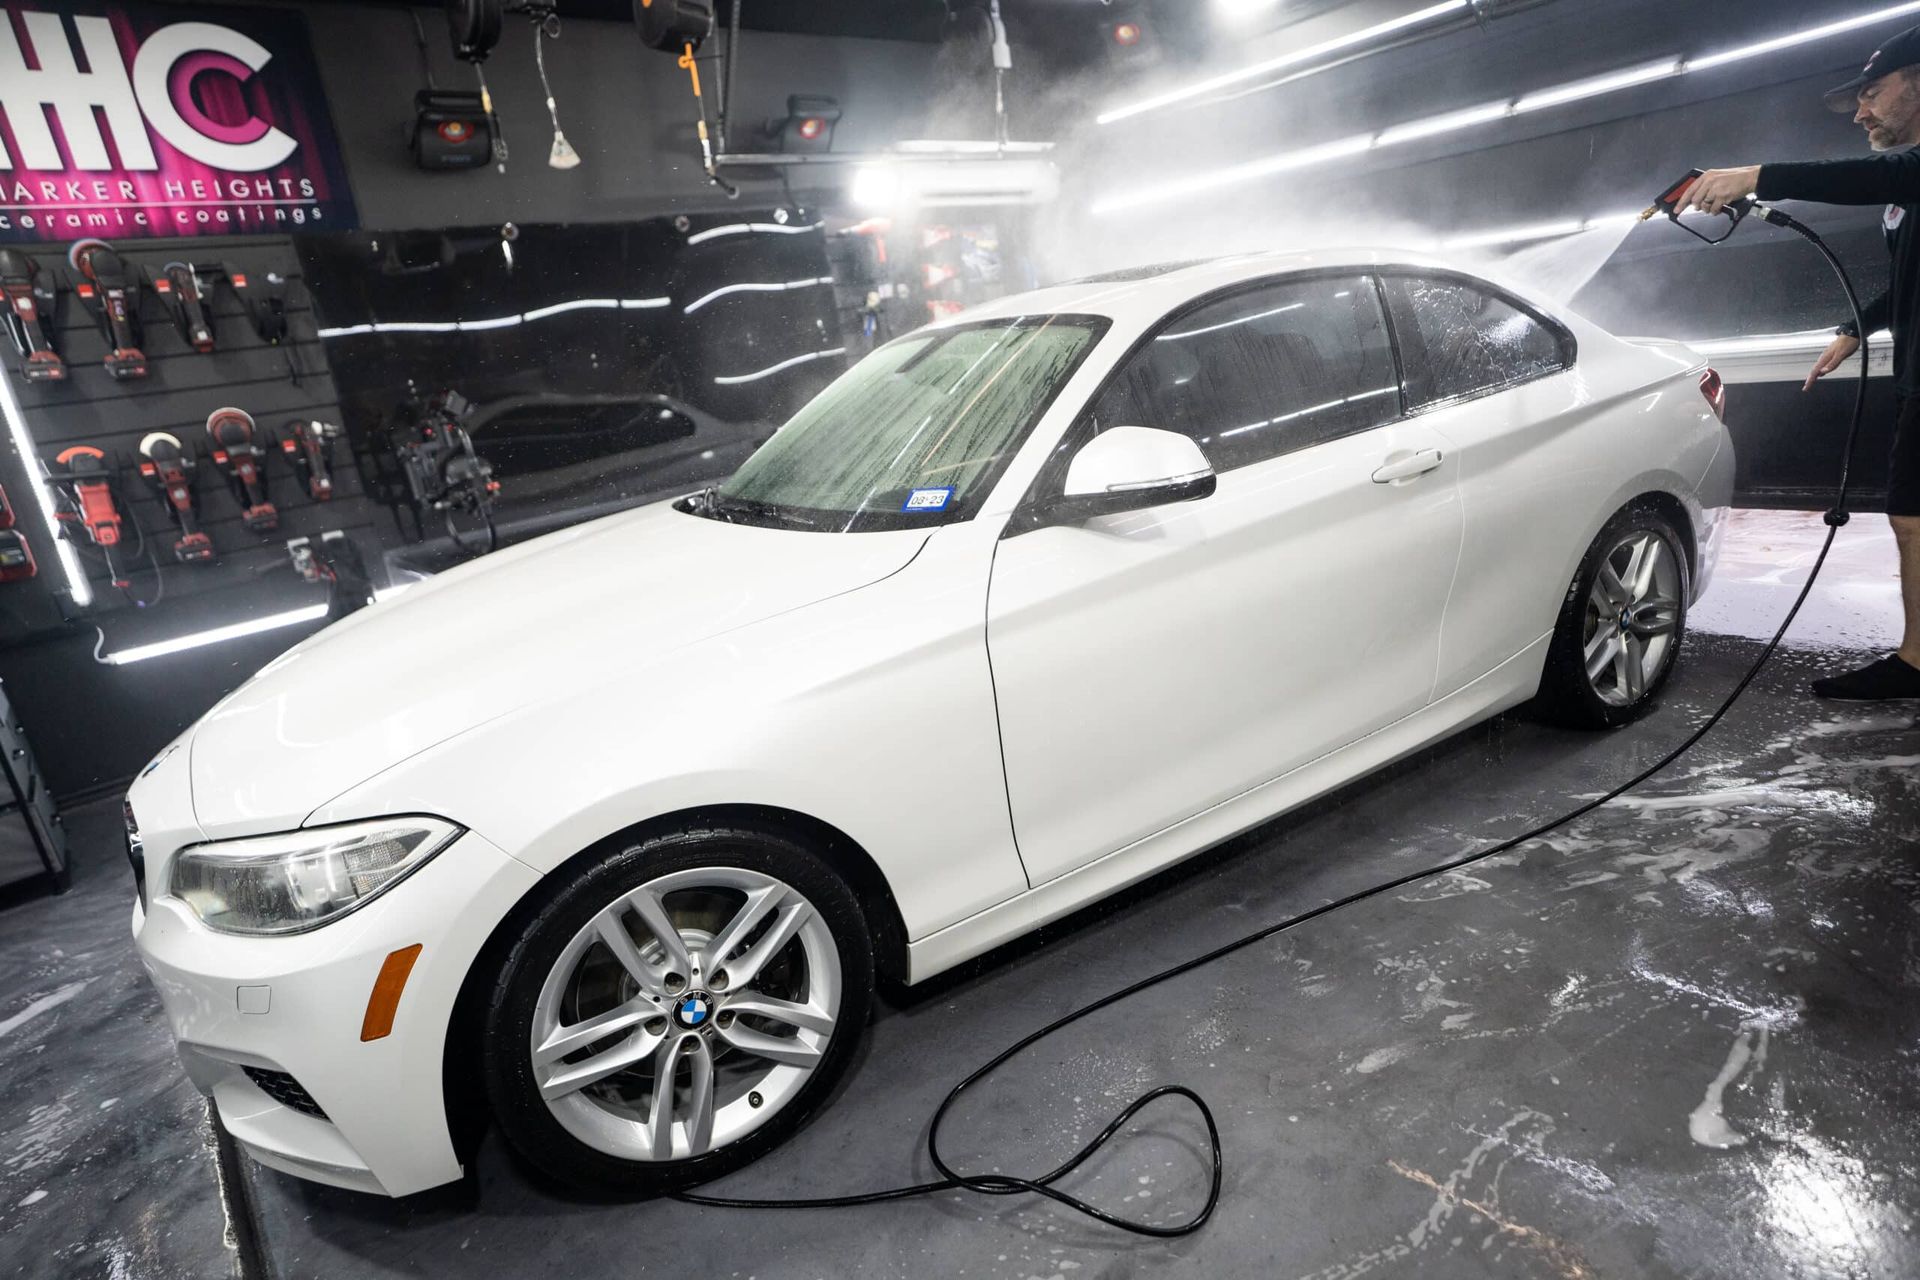 A man is washing a white bmw with a high pressure washer.